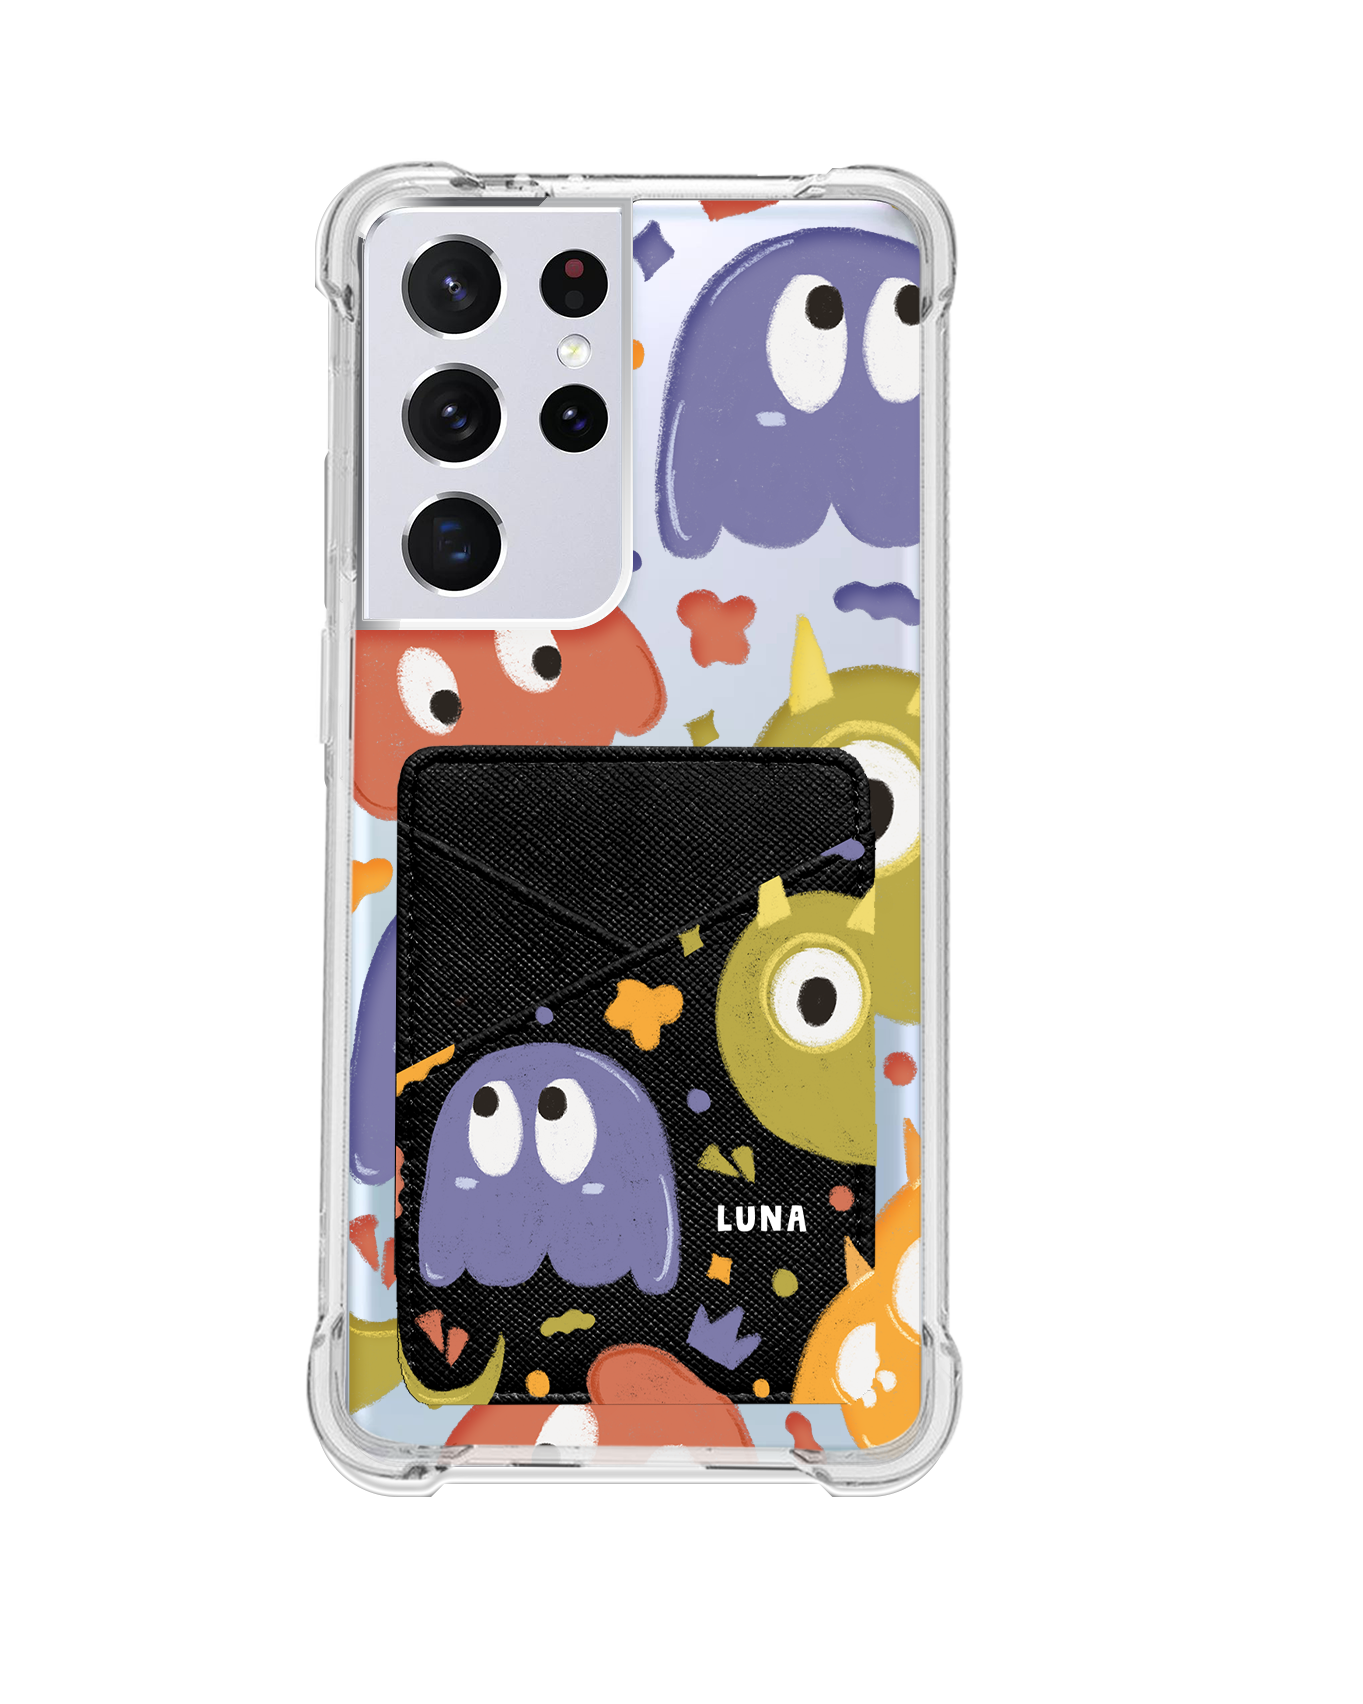 Android Phone Wallet Case - Cute Monster 1.0